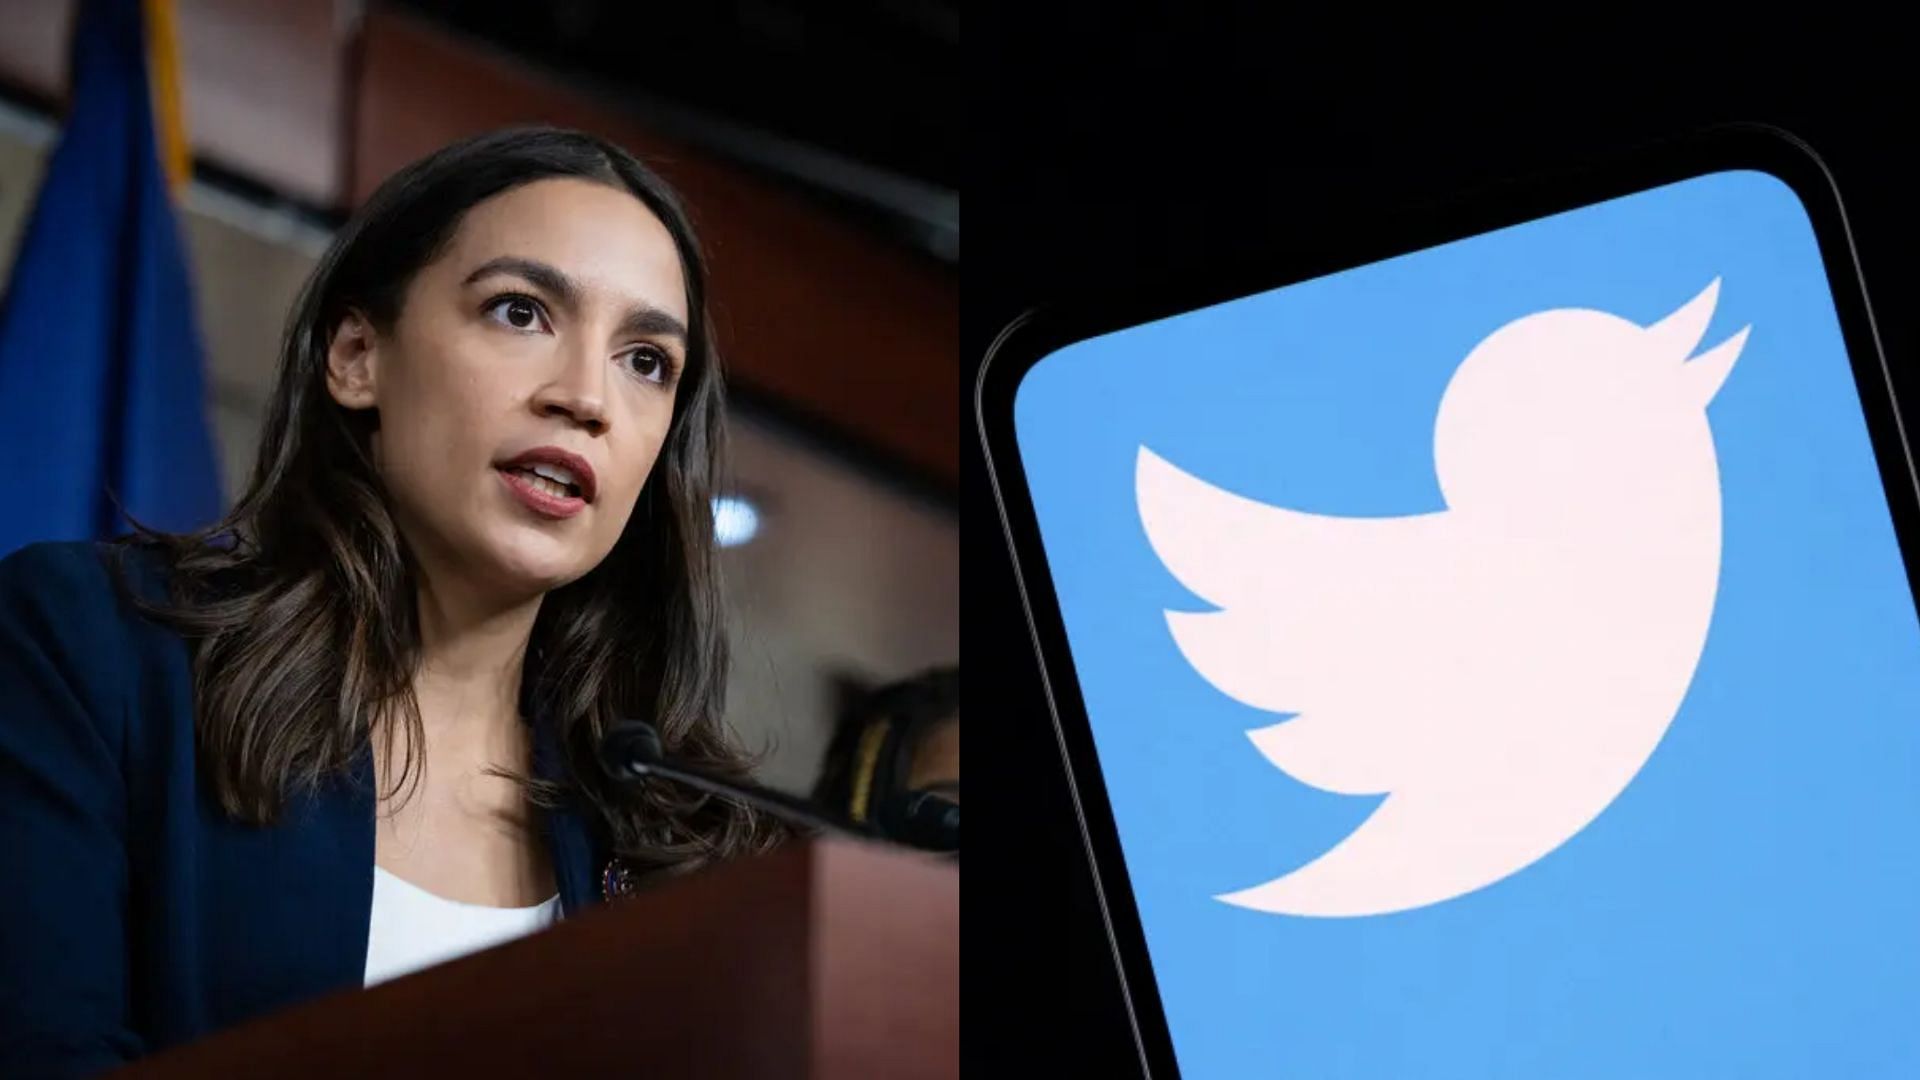 NY Congresswoman Alexandria Ocasio-Cortez is alleged to have owned a burner account by the name Zaza Demon. (Image via Getty Images, Shutterstock)